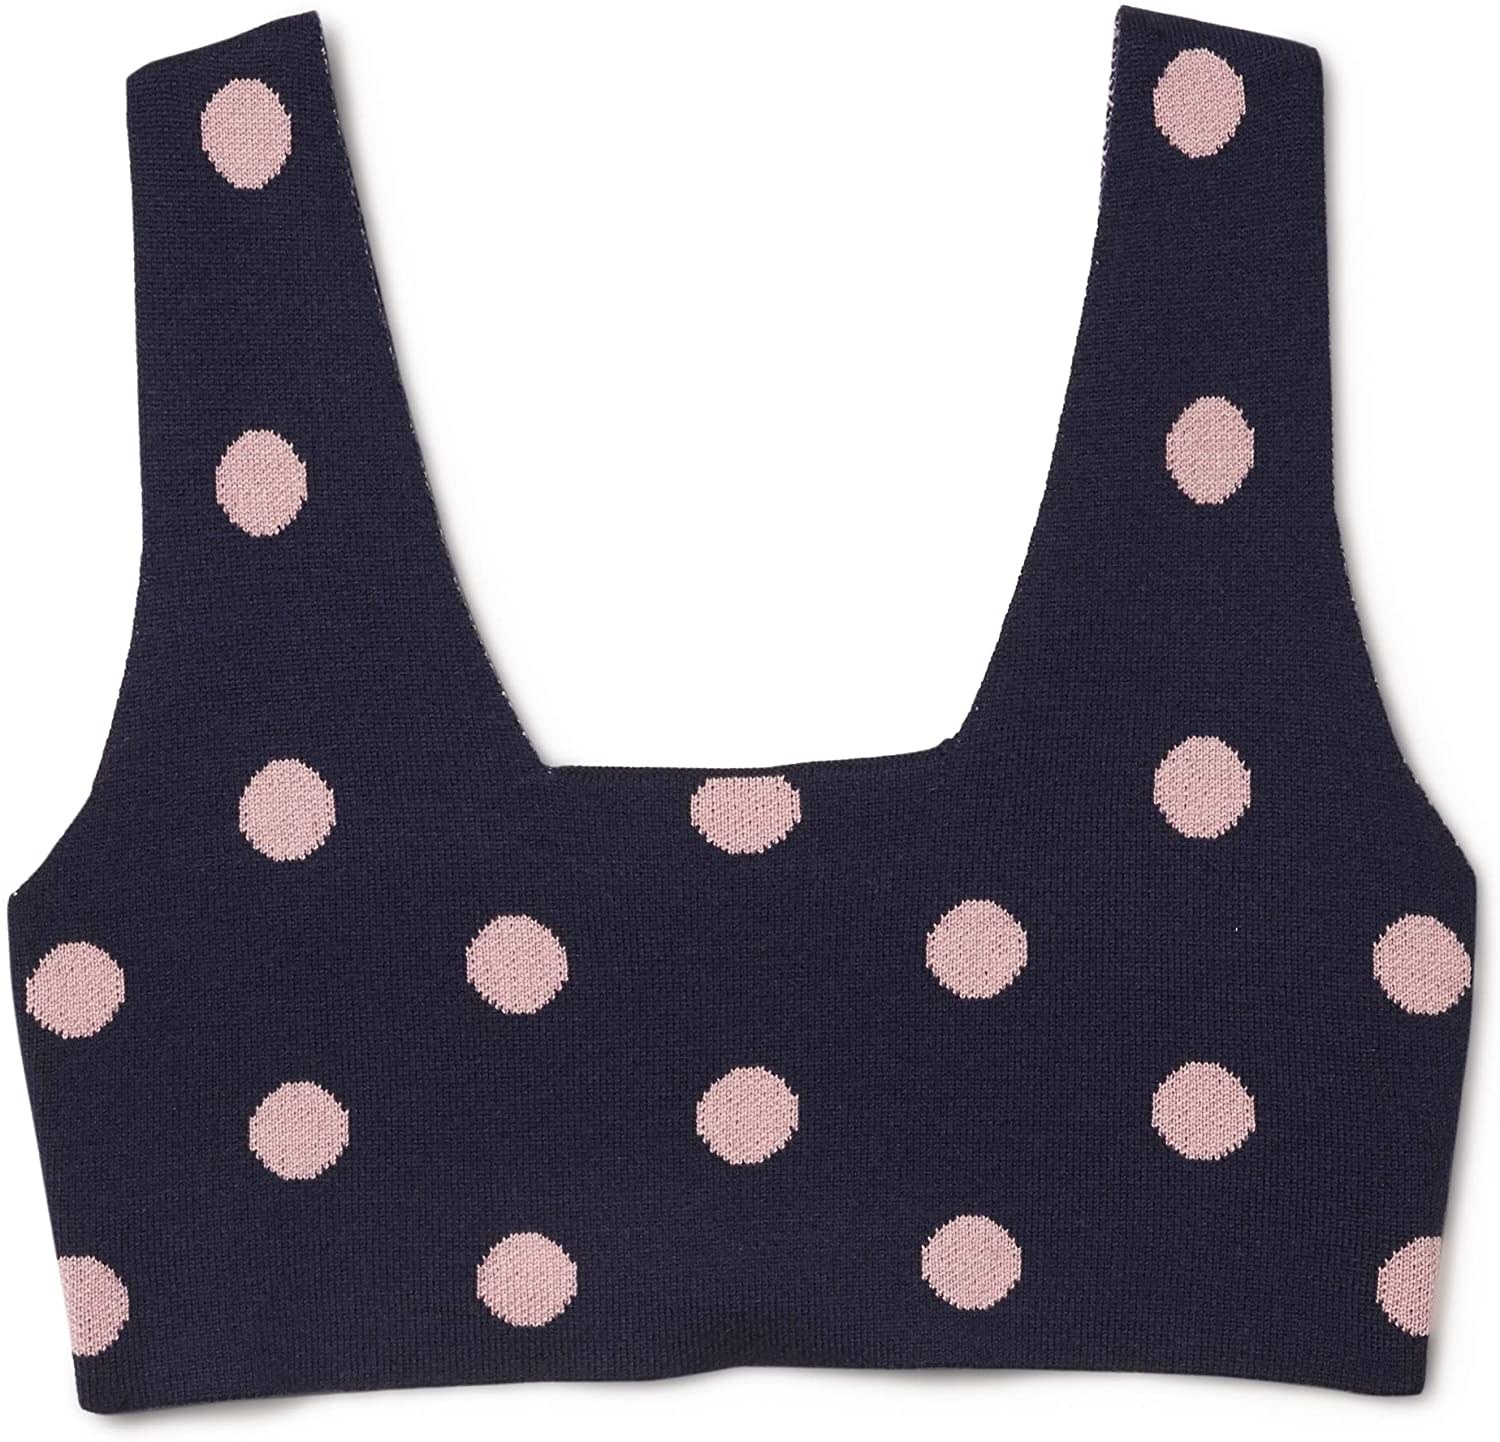 The pink and navy polka-dot bralette 